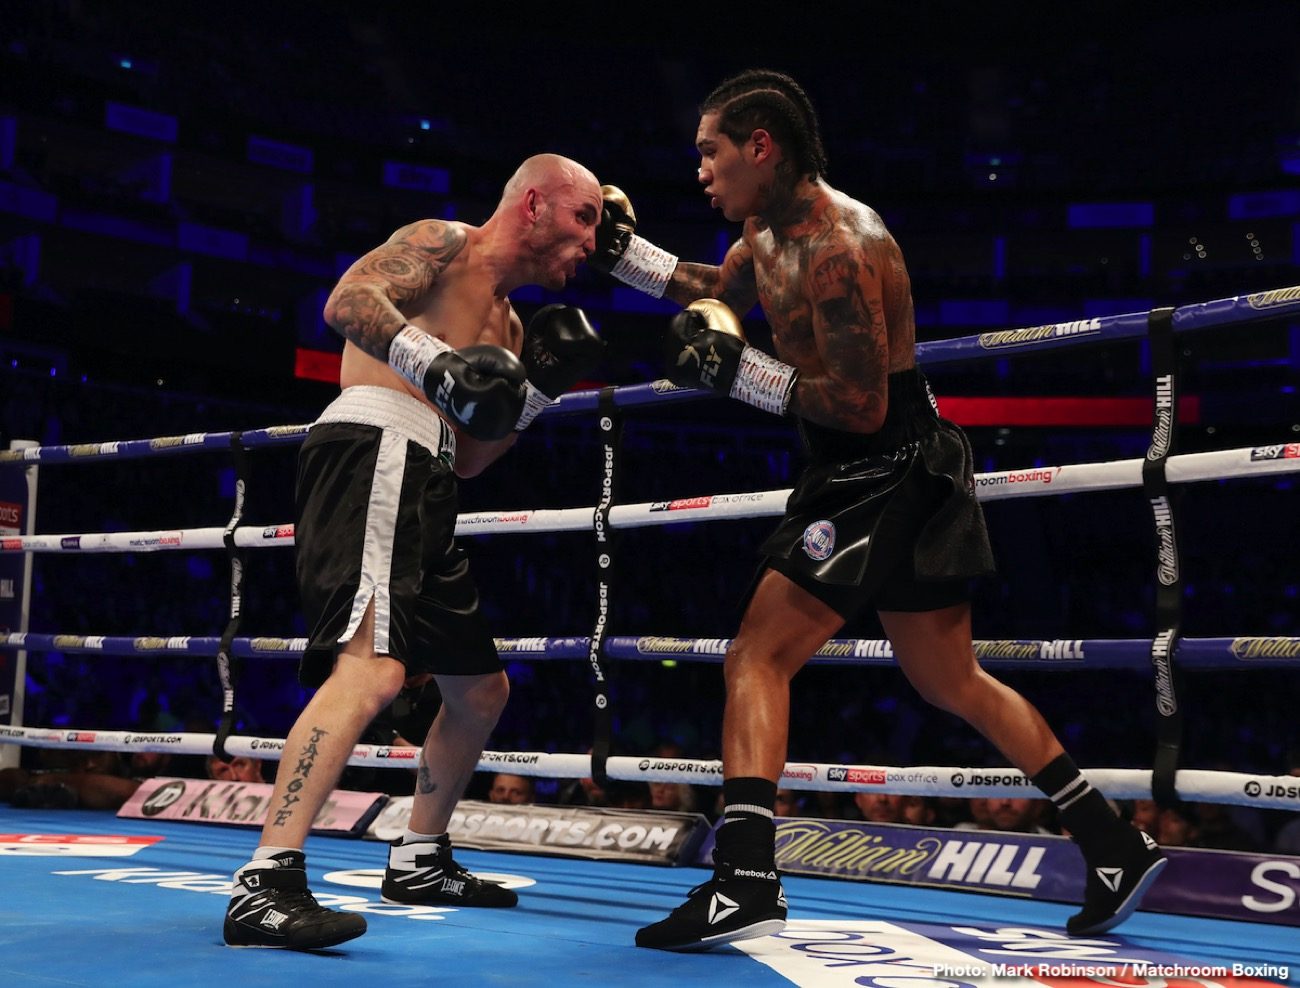 RESULTS: Conor Benn Improves To 16-0 With KO Over Steve Jamoye